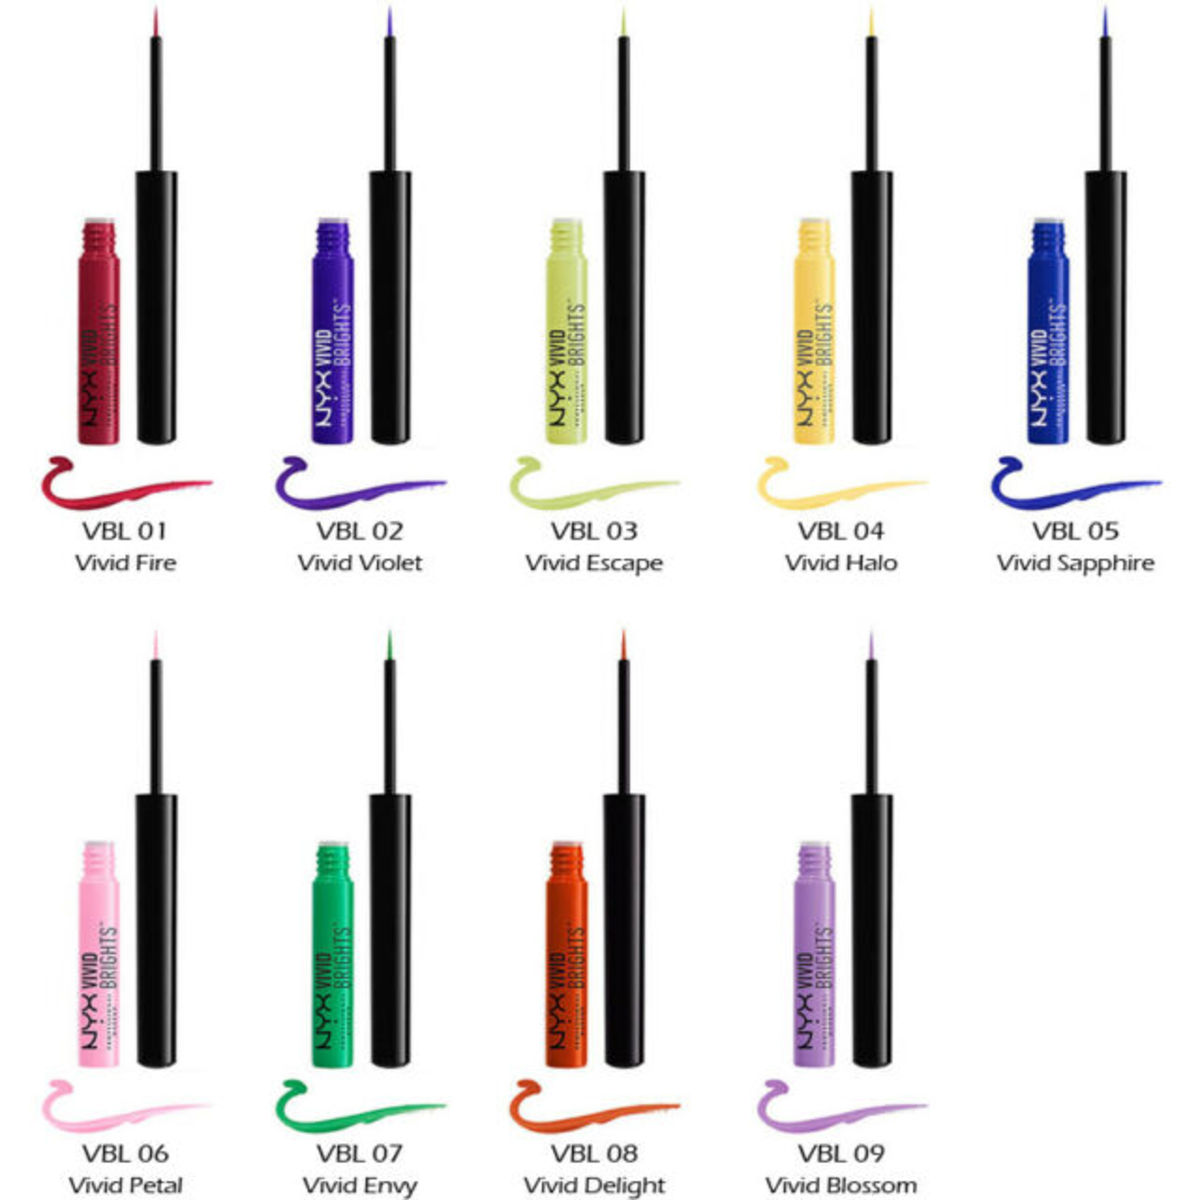 All of the NYX Vivid Brights colors